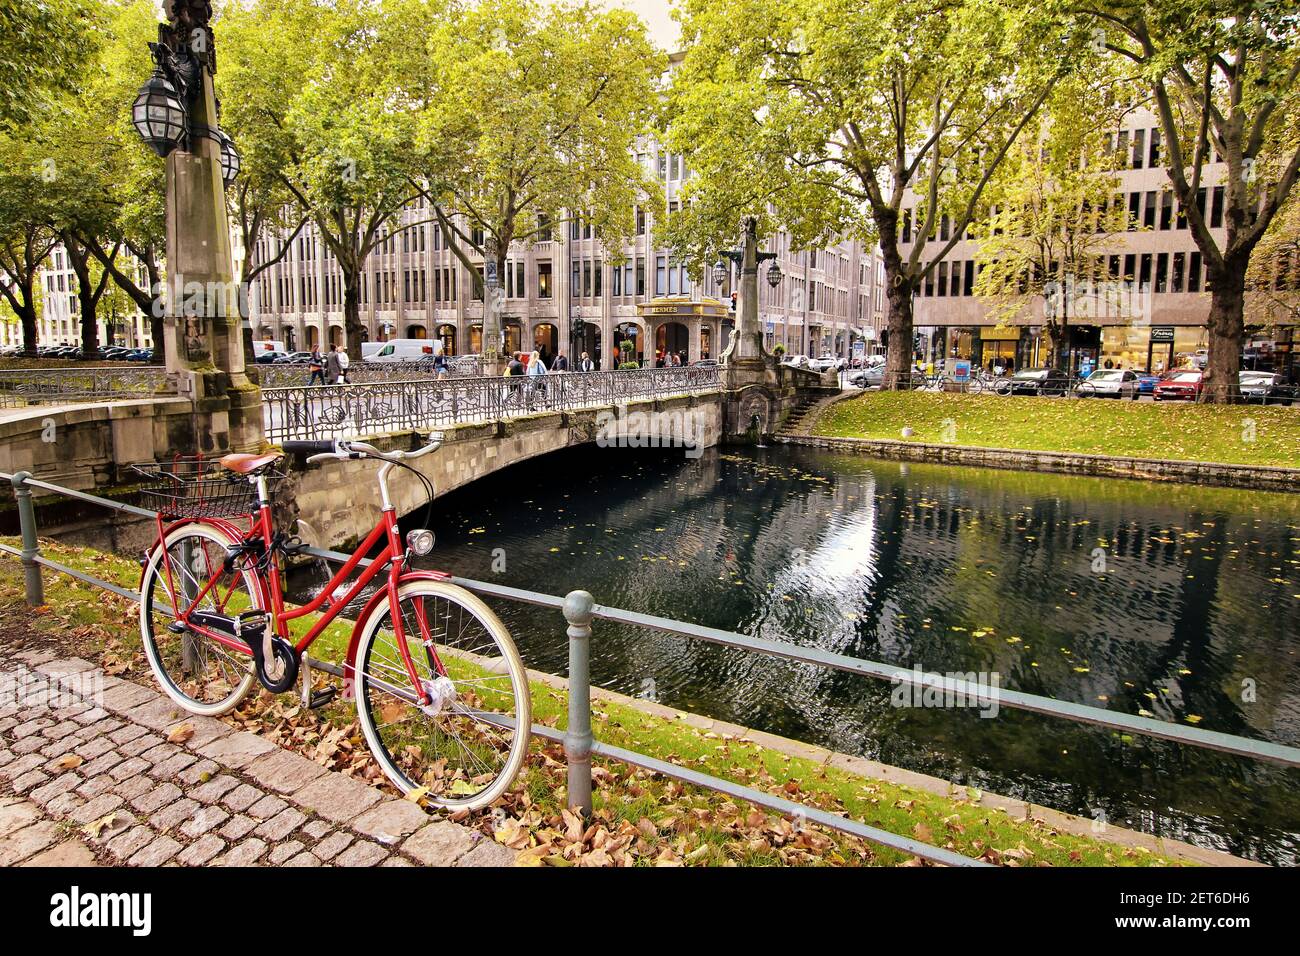 Königsallee is not only a famous shopping boulevard in Düsseldorf, but also has cyclist-friendly green areas. Red bike at the city canal, retro style. Stock Photo